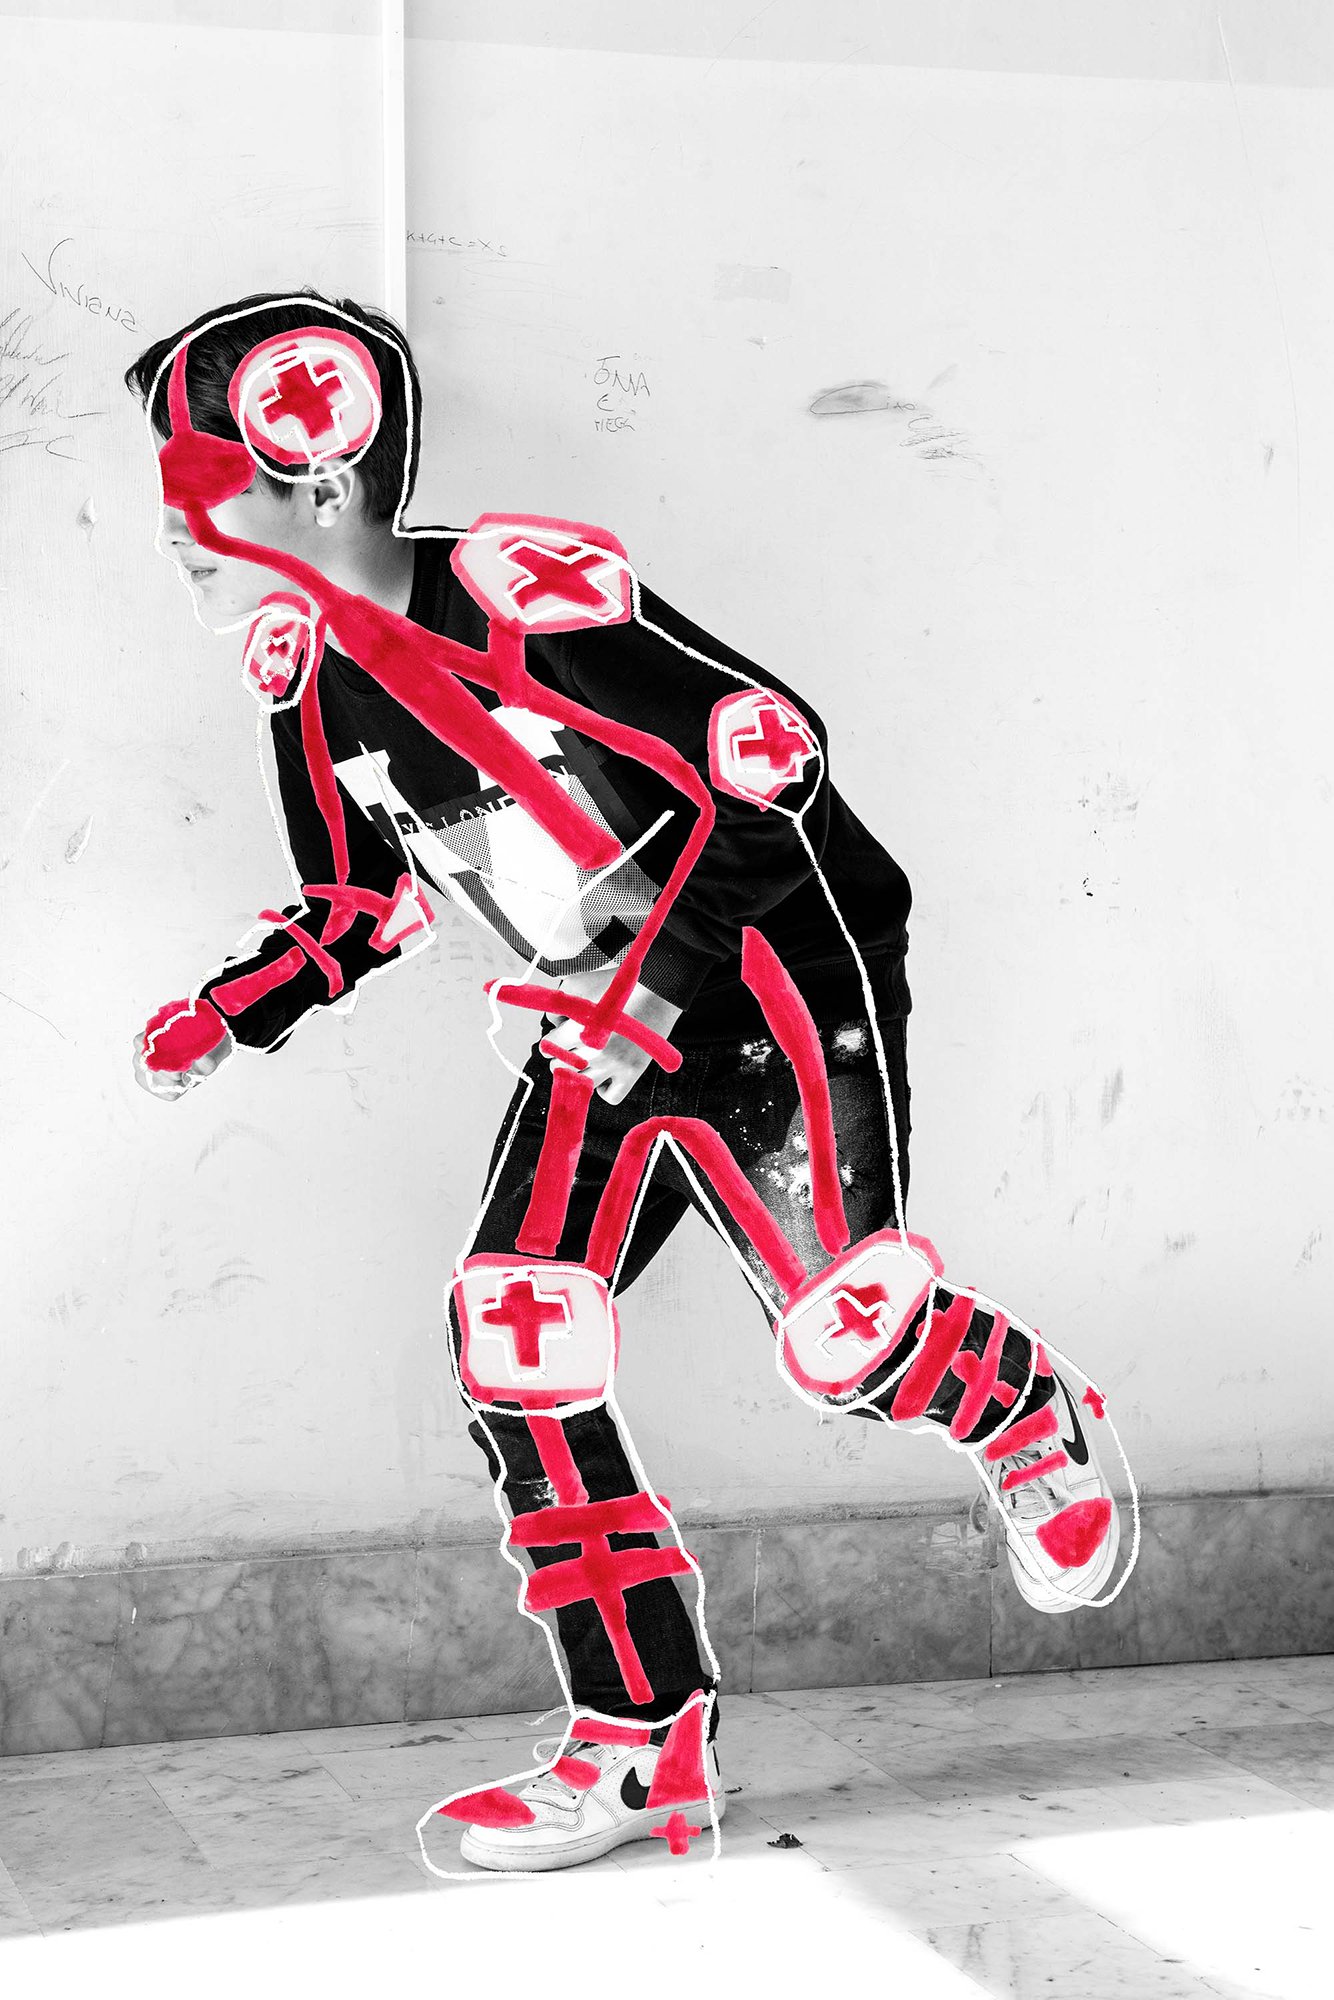 A picture of a person in the middle of a running pose, drawn over with a white outline and bold red lines from their head out to their limbs. Red crosses and white circles mark the person's joints.